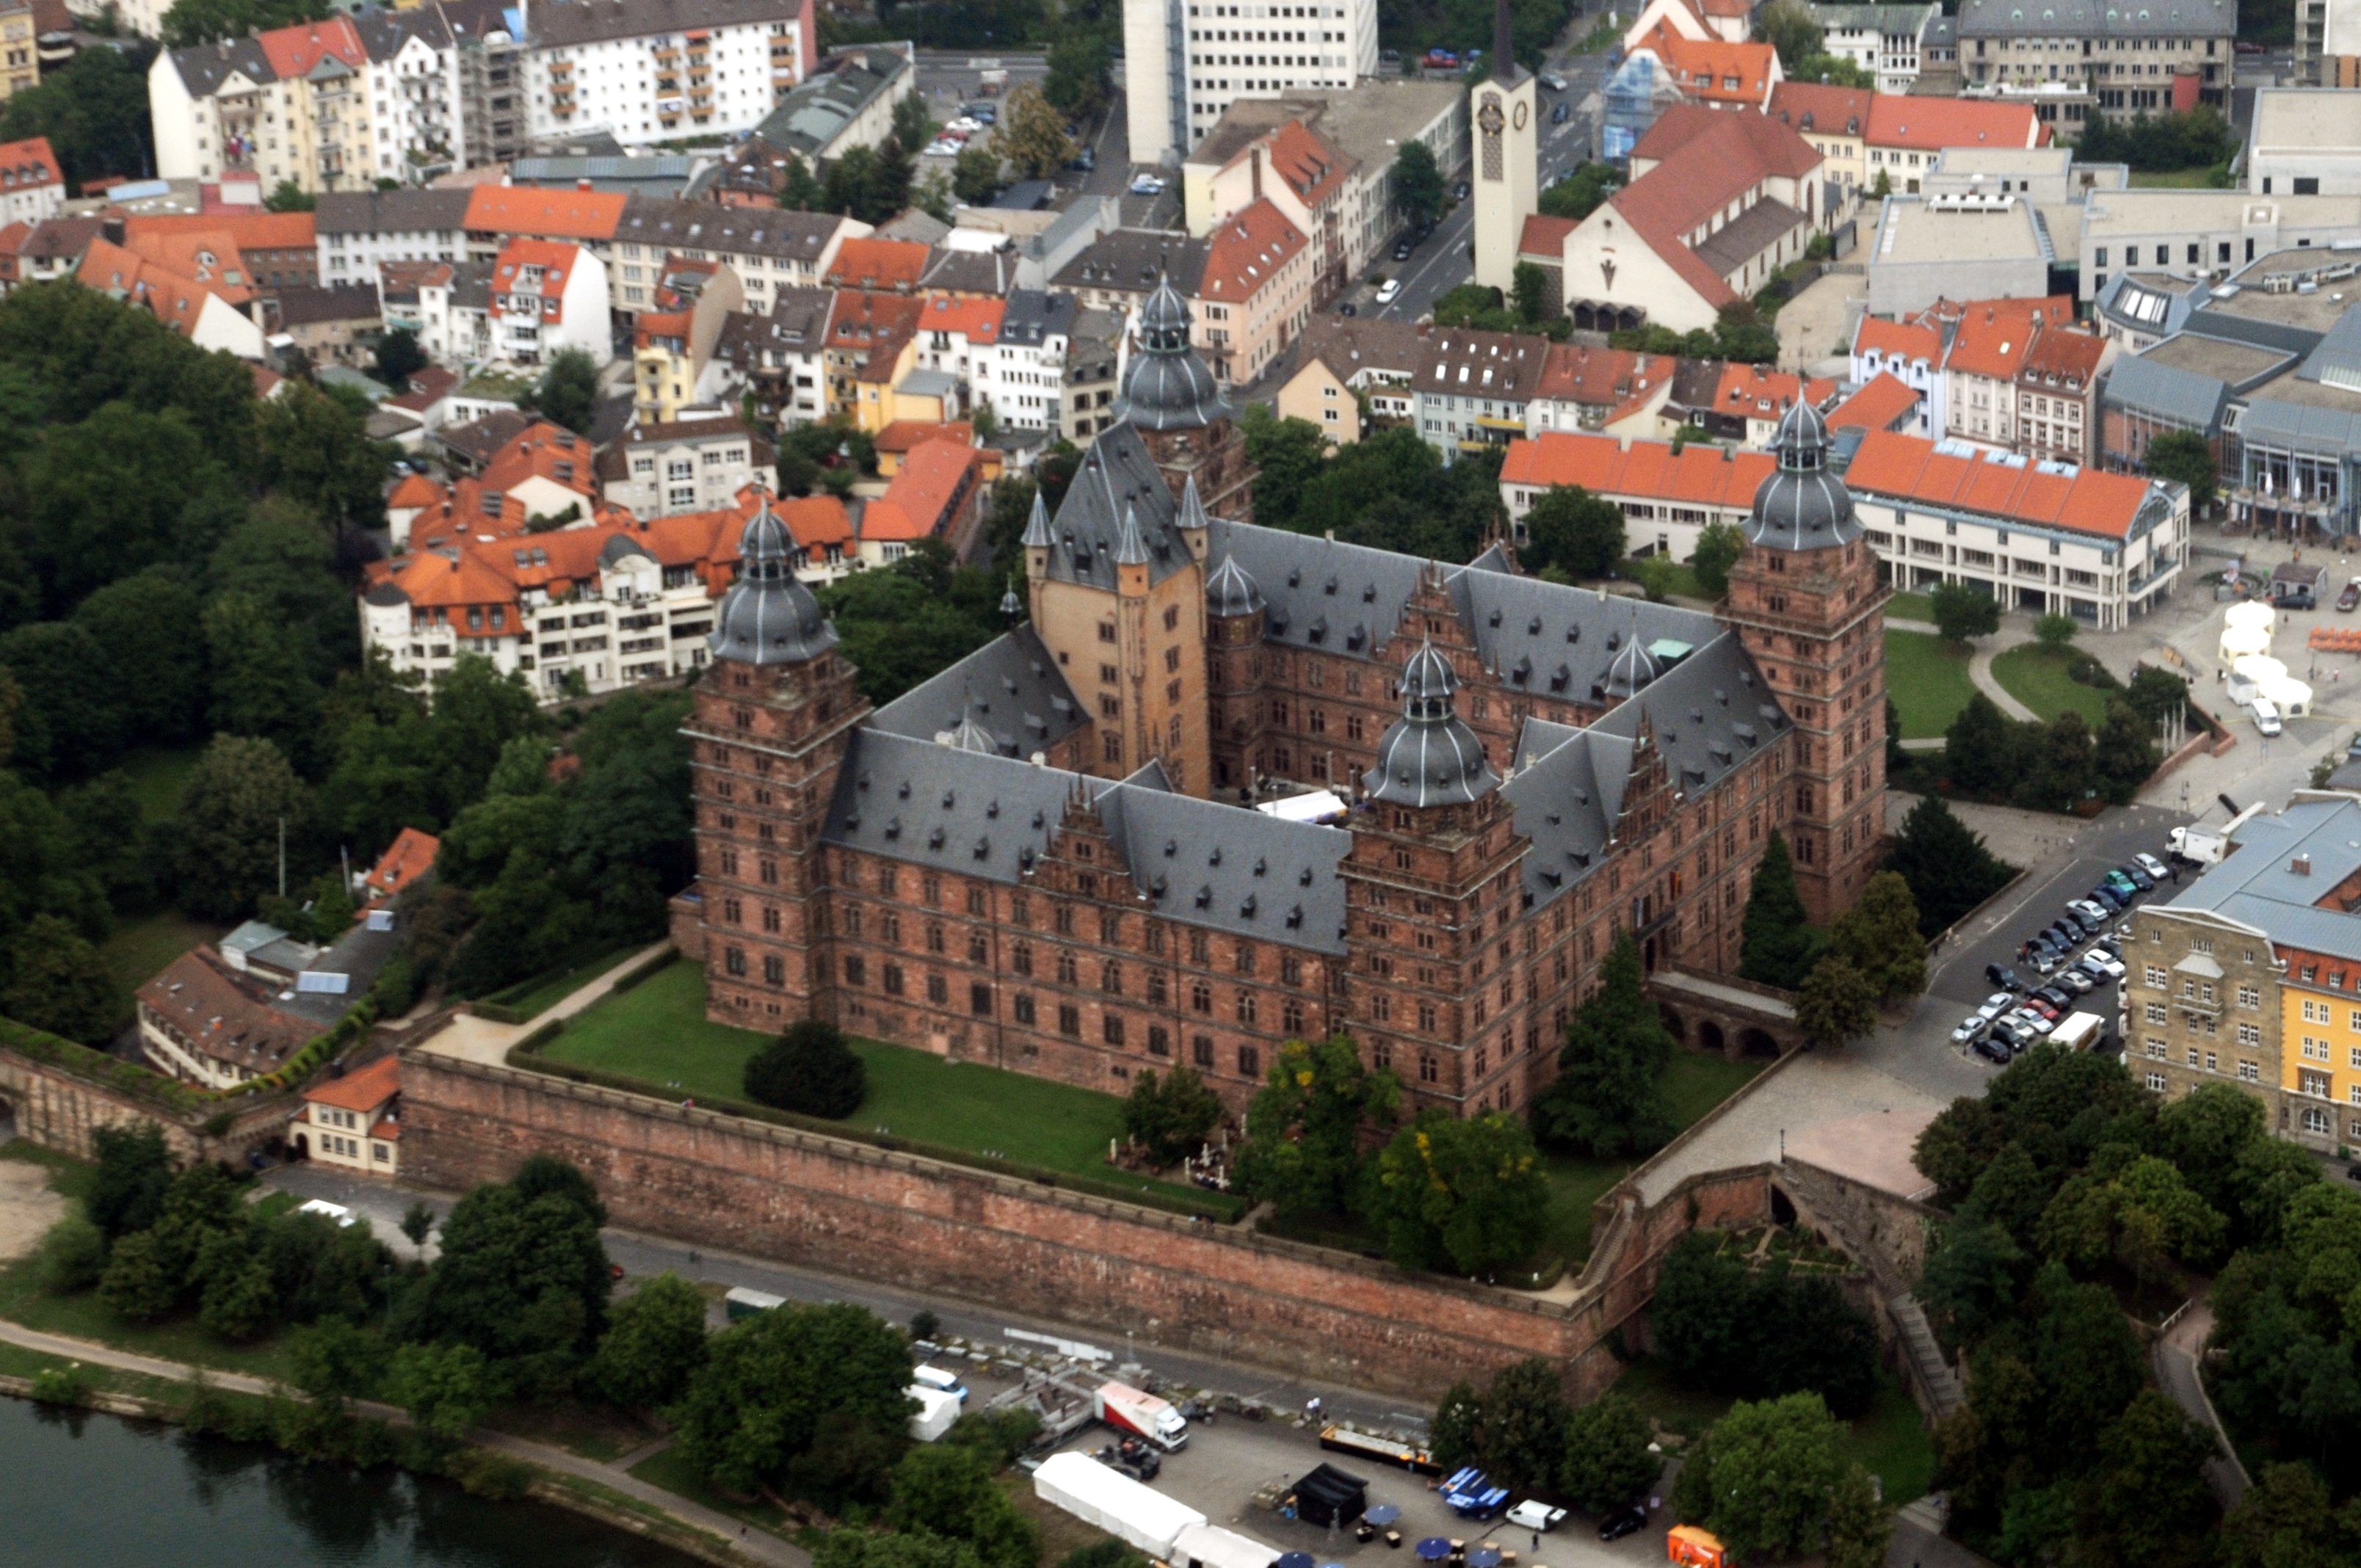 "Schloss Johannisburg Aschaffenburg Aerial fg170" by Fritz Geller-Grimm supported by Rüdiger Wandke - Own work. Licensed under CC BY-SA 3.0 via Wikimedia Commons - https://commons.wikimedia.org/wiki/File:Schloss_Johannisburg_Aschaffenburg_Aerial_fg170.jpg#/media/File:Schloss_Johannisburg_Aschaffenburg_Aerial_fg170.jpg